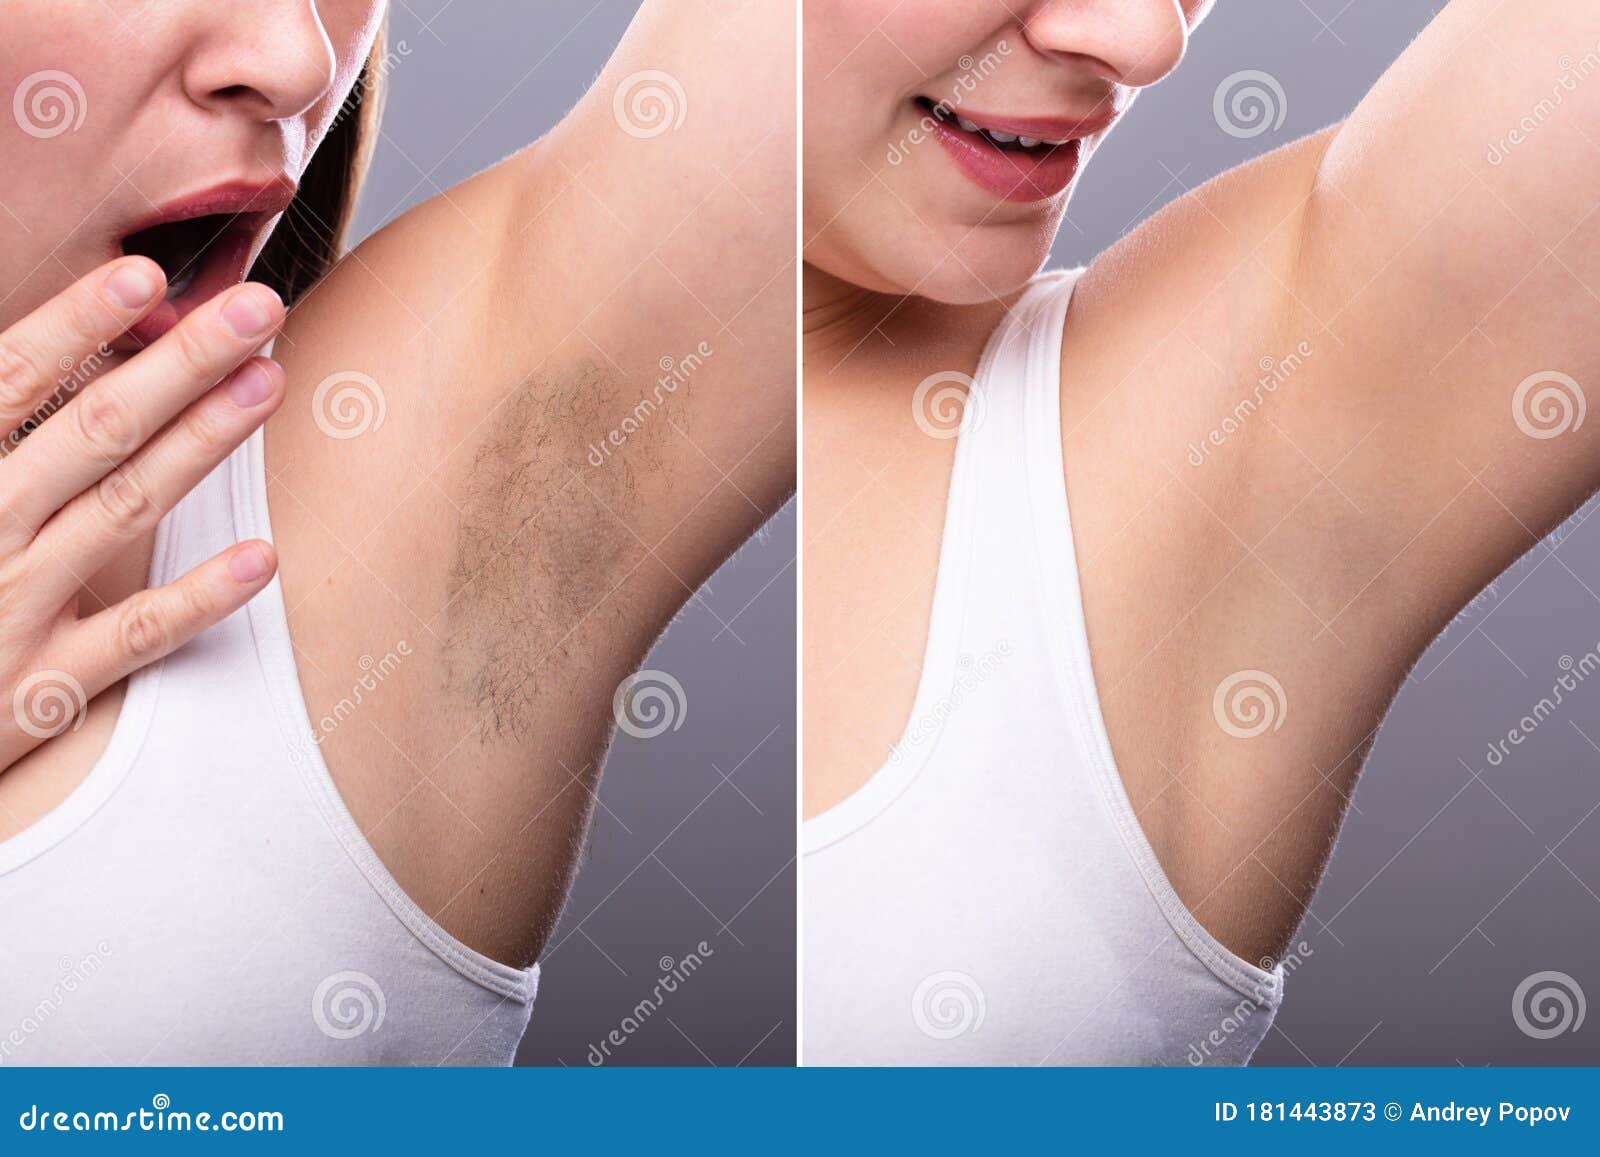 before and after concept of underarm hair removal